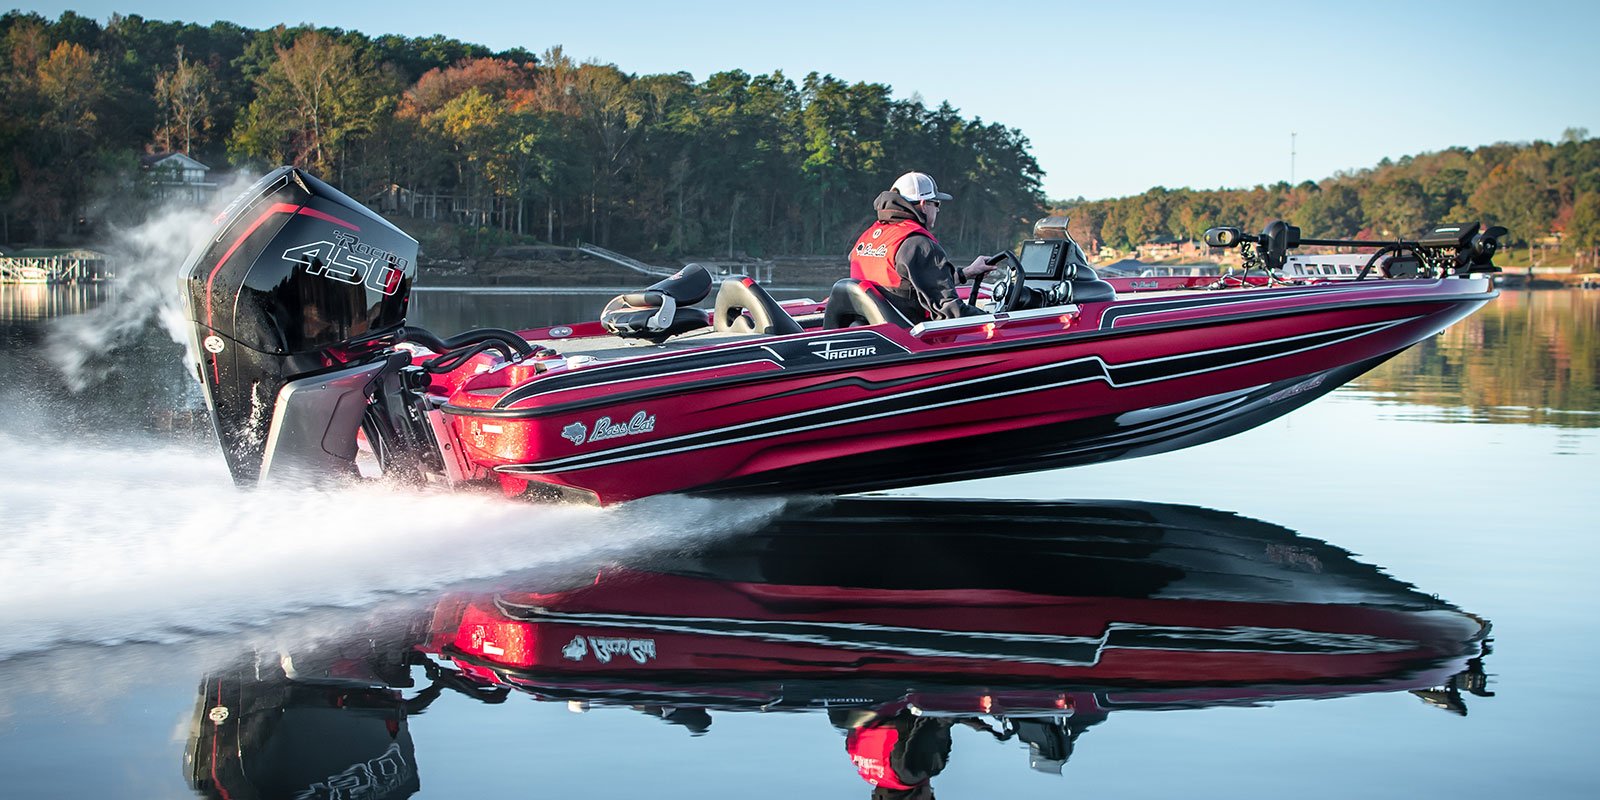 Introducing the Baddest Cats on the Water: Bass Cat Boats